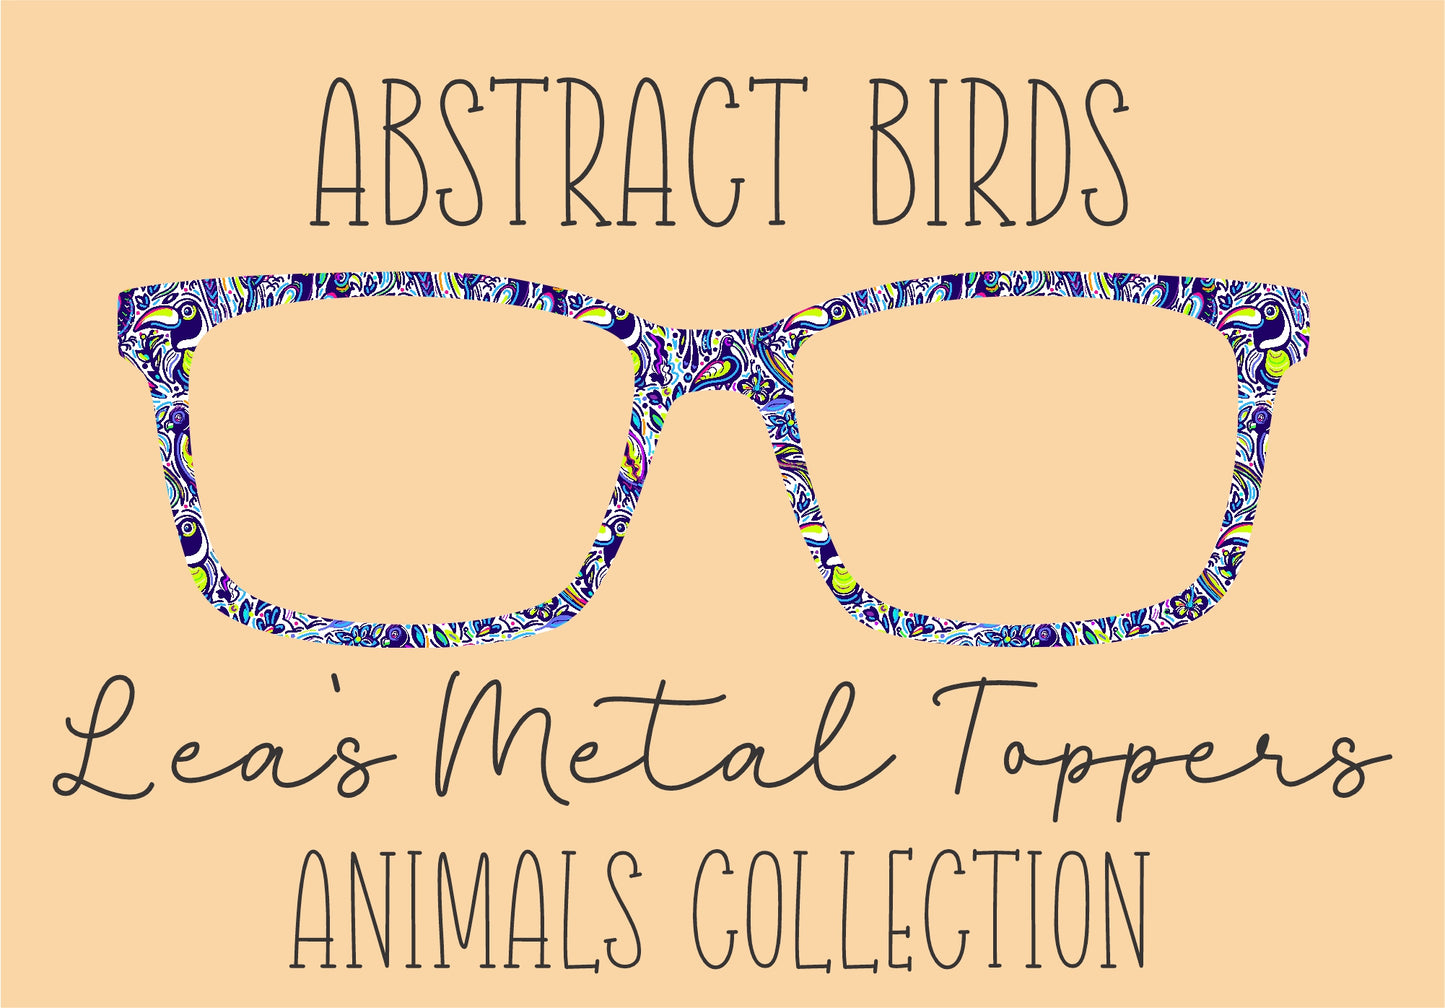 ABSTRACT BIRDS Eyewear Frame Toppers COMES WITH MAGNETS